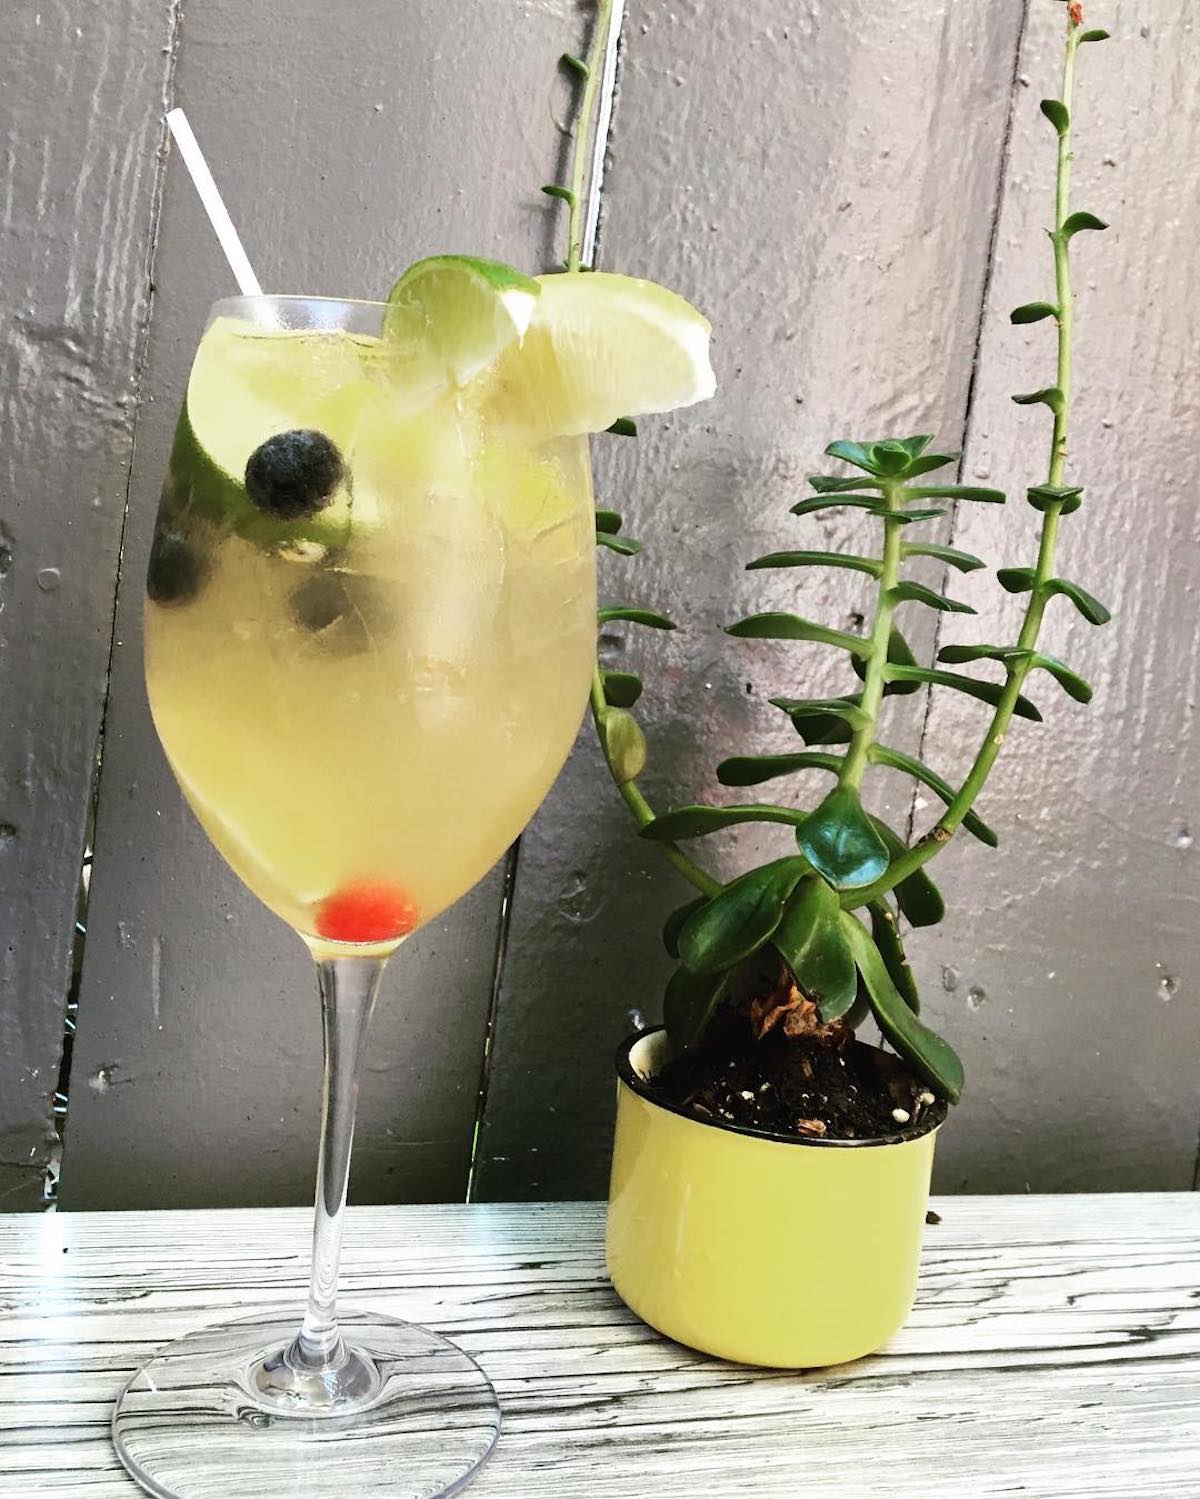 Tall glass of white wine sangria garnished with fruit beside a small plant